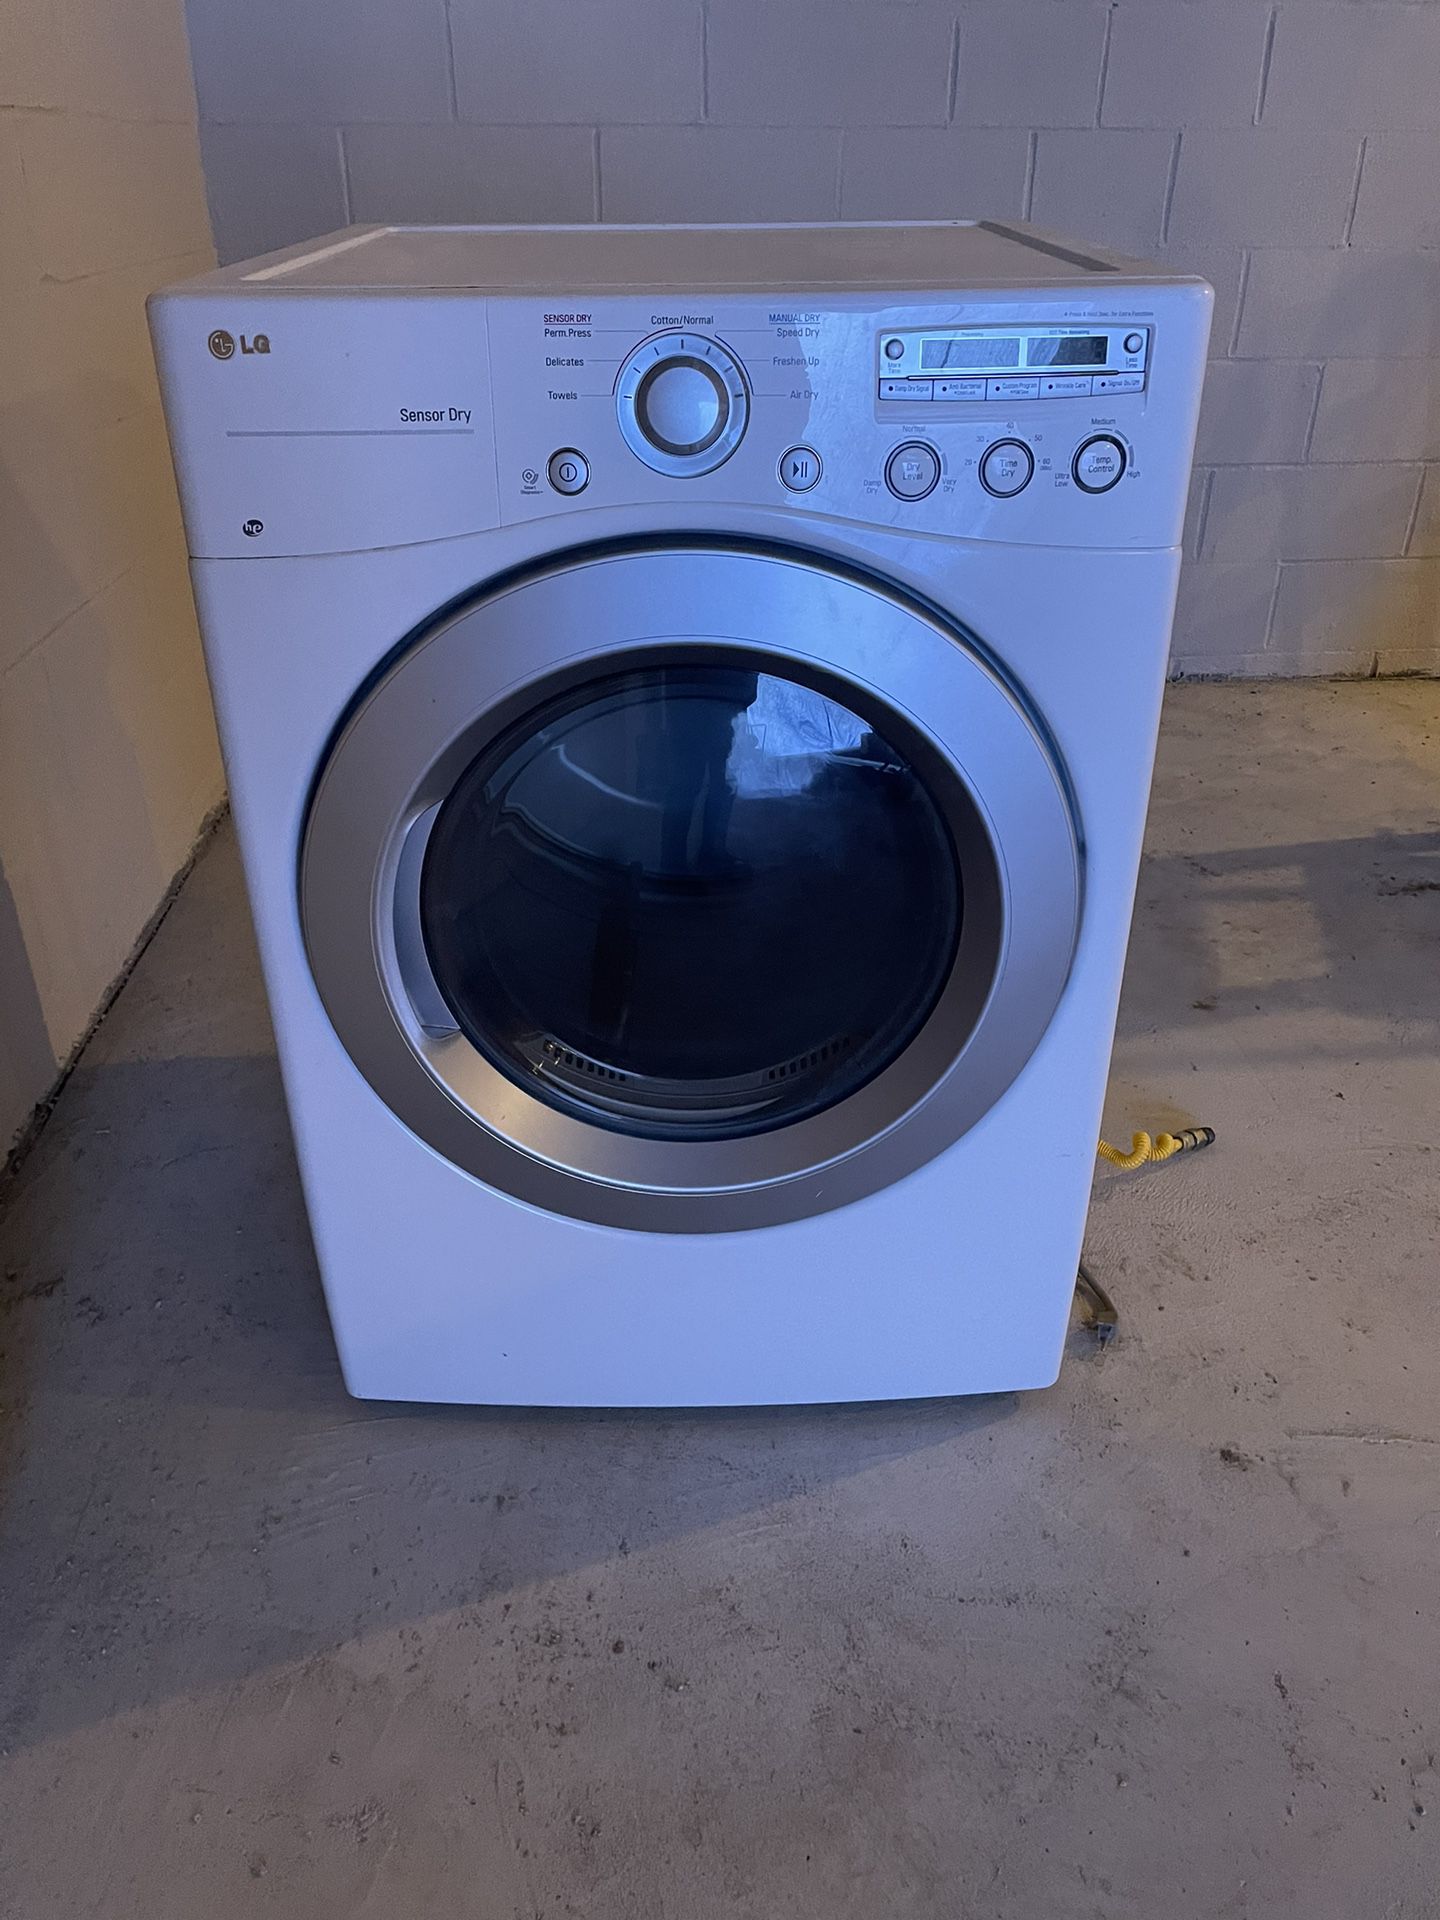 gas-dryer-for-sale-in-queens-ny-offerup